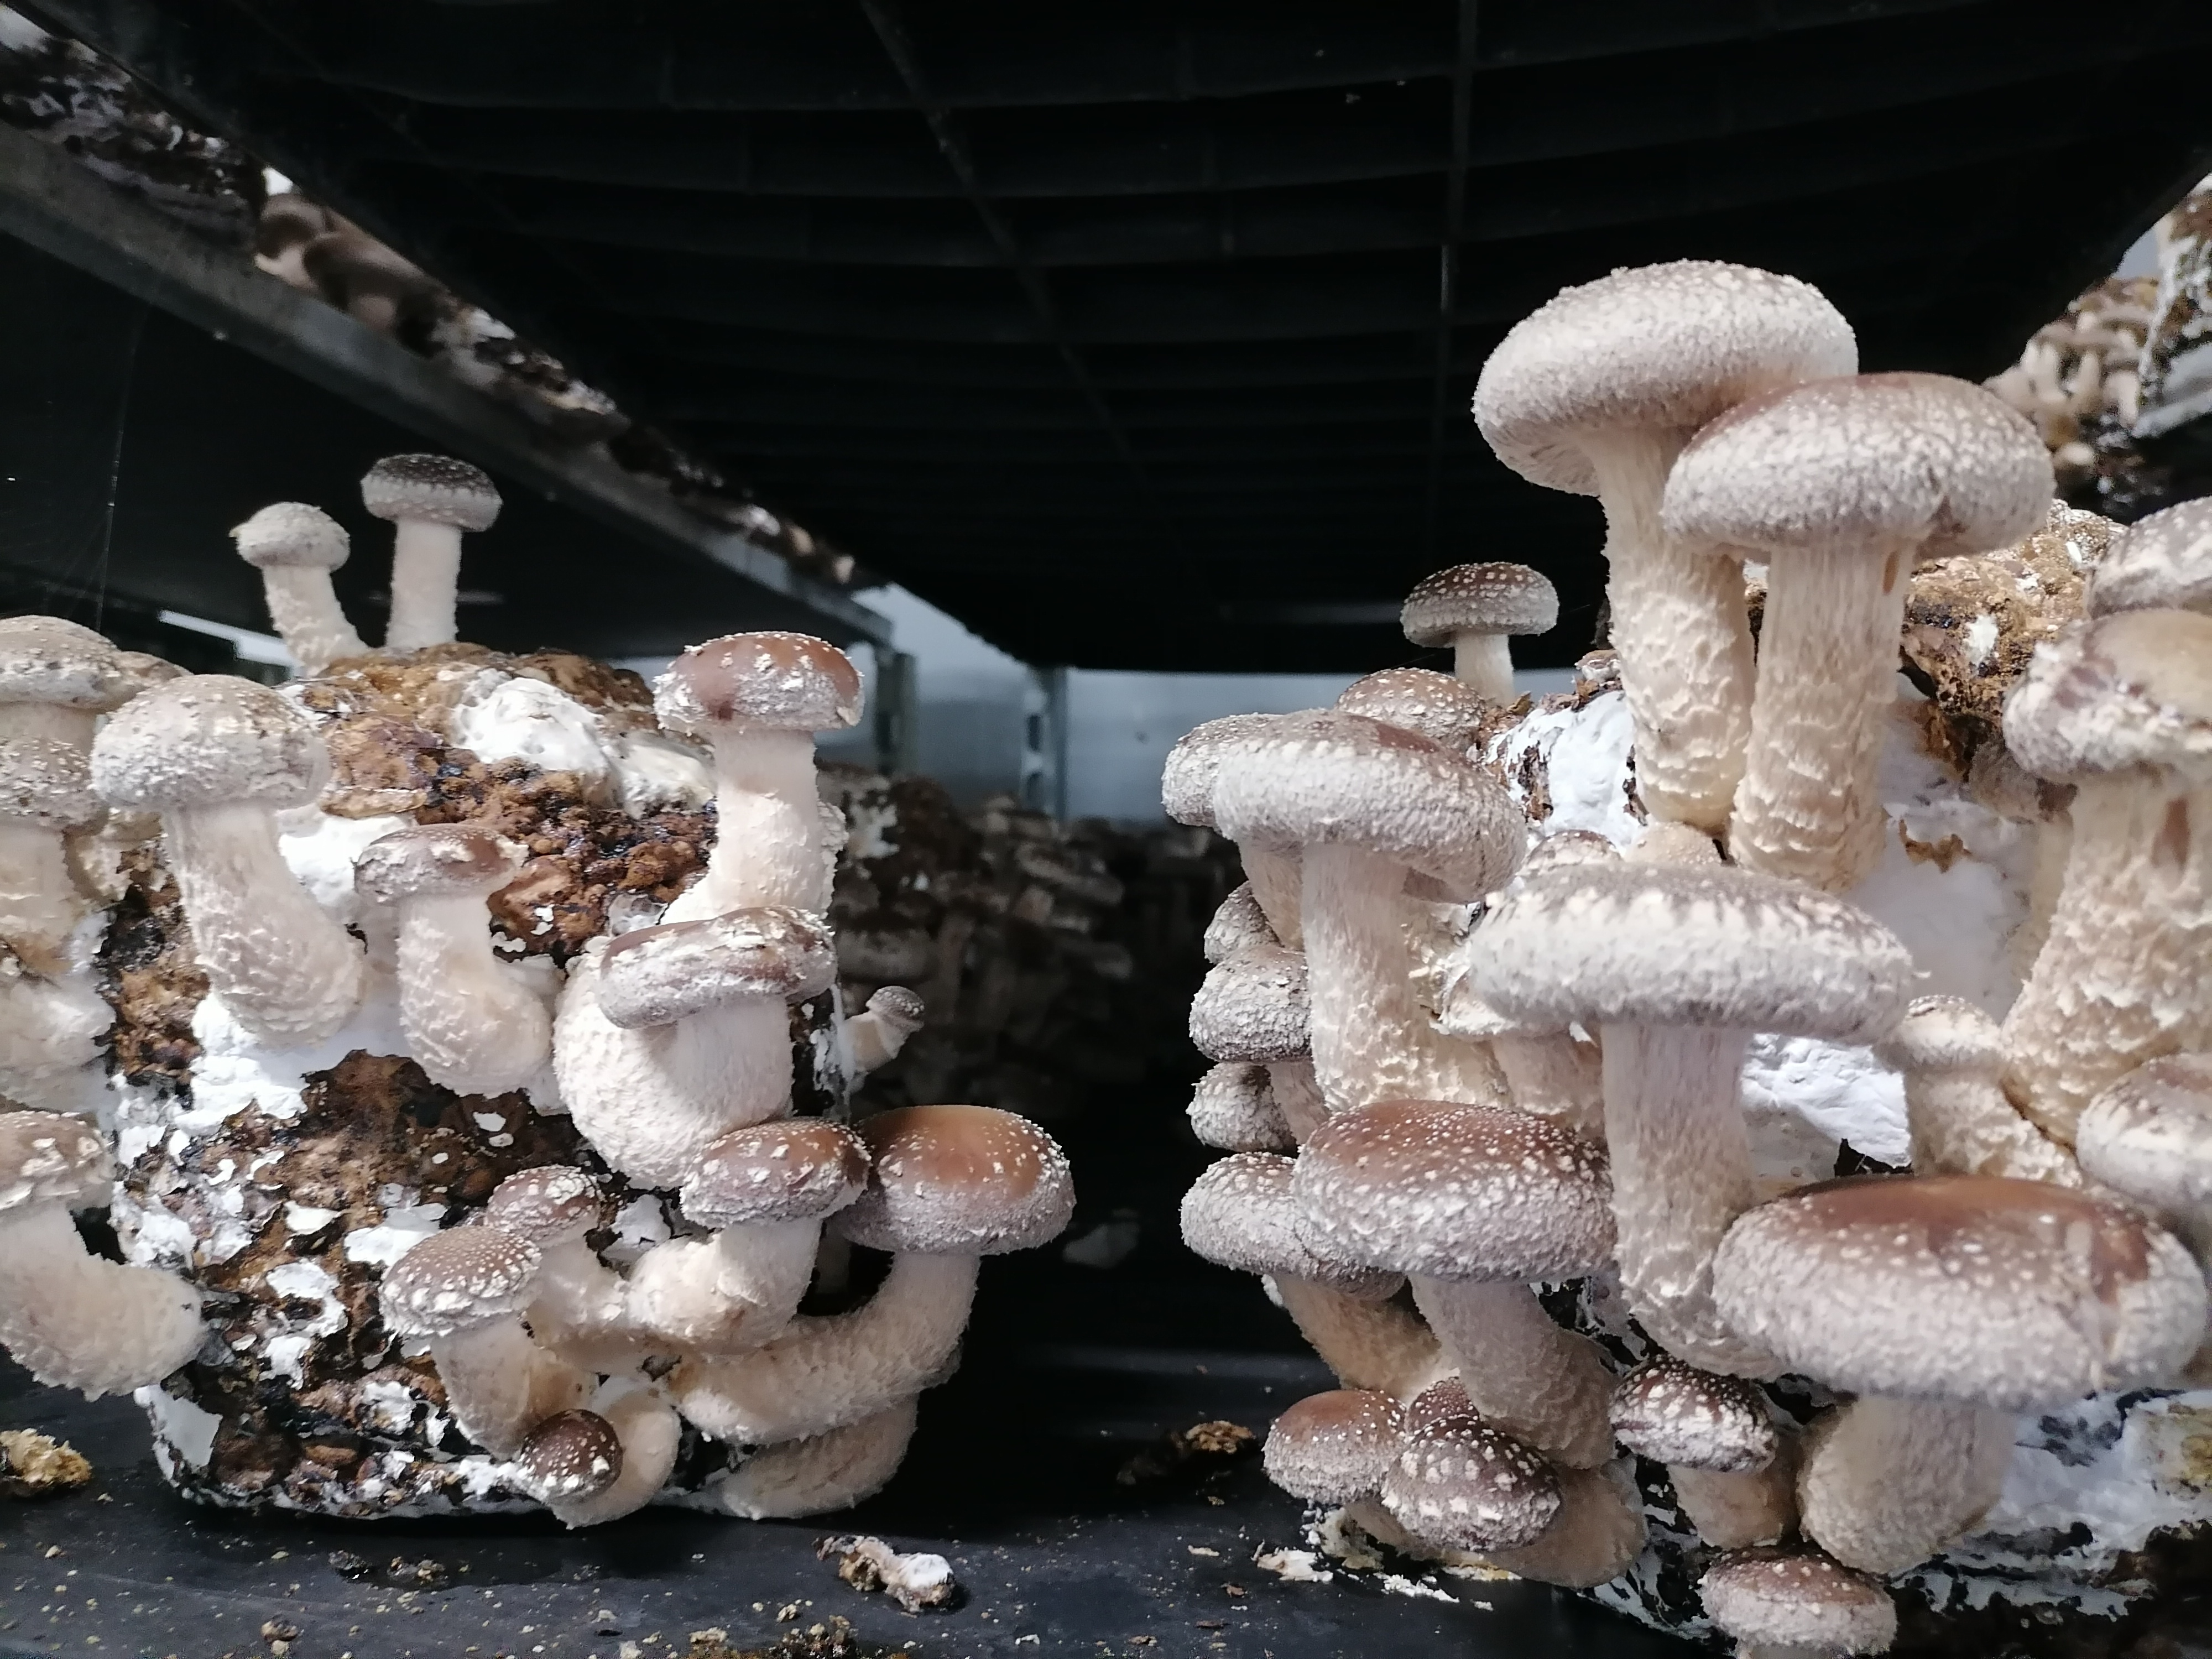 What's the reason for the bad shape of shiitake mushrooms?